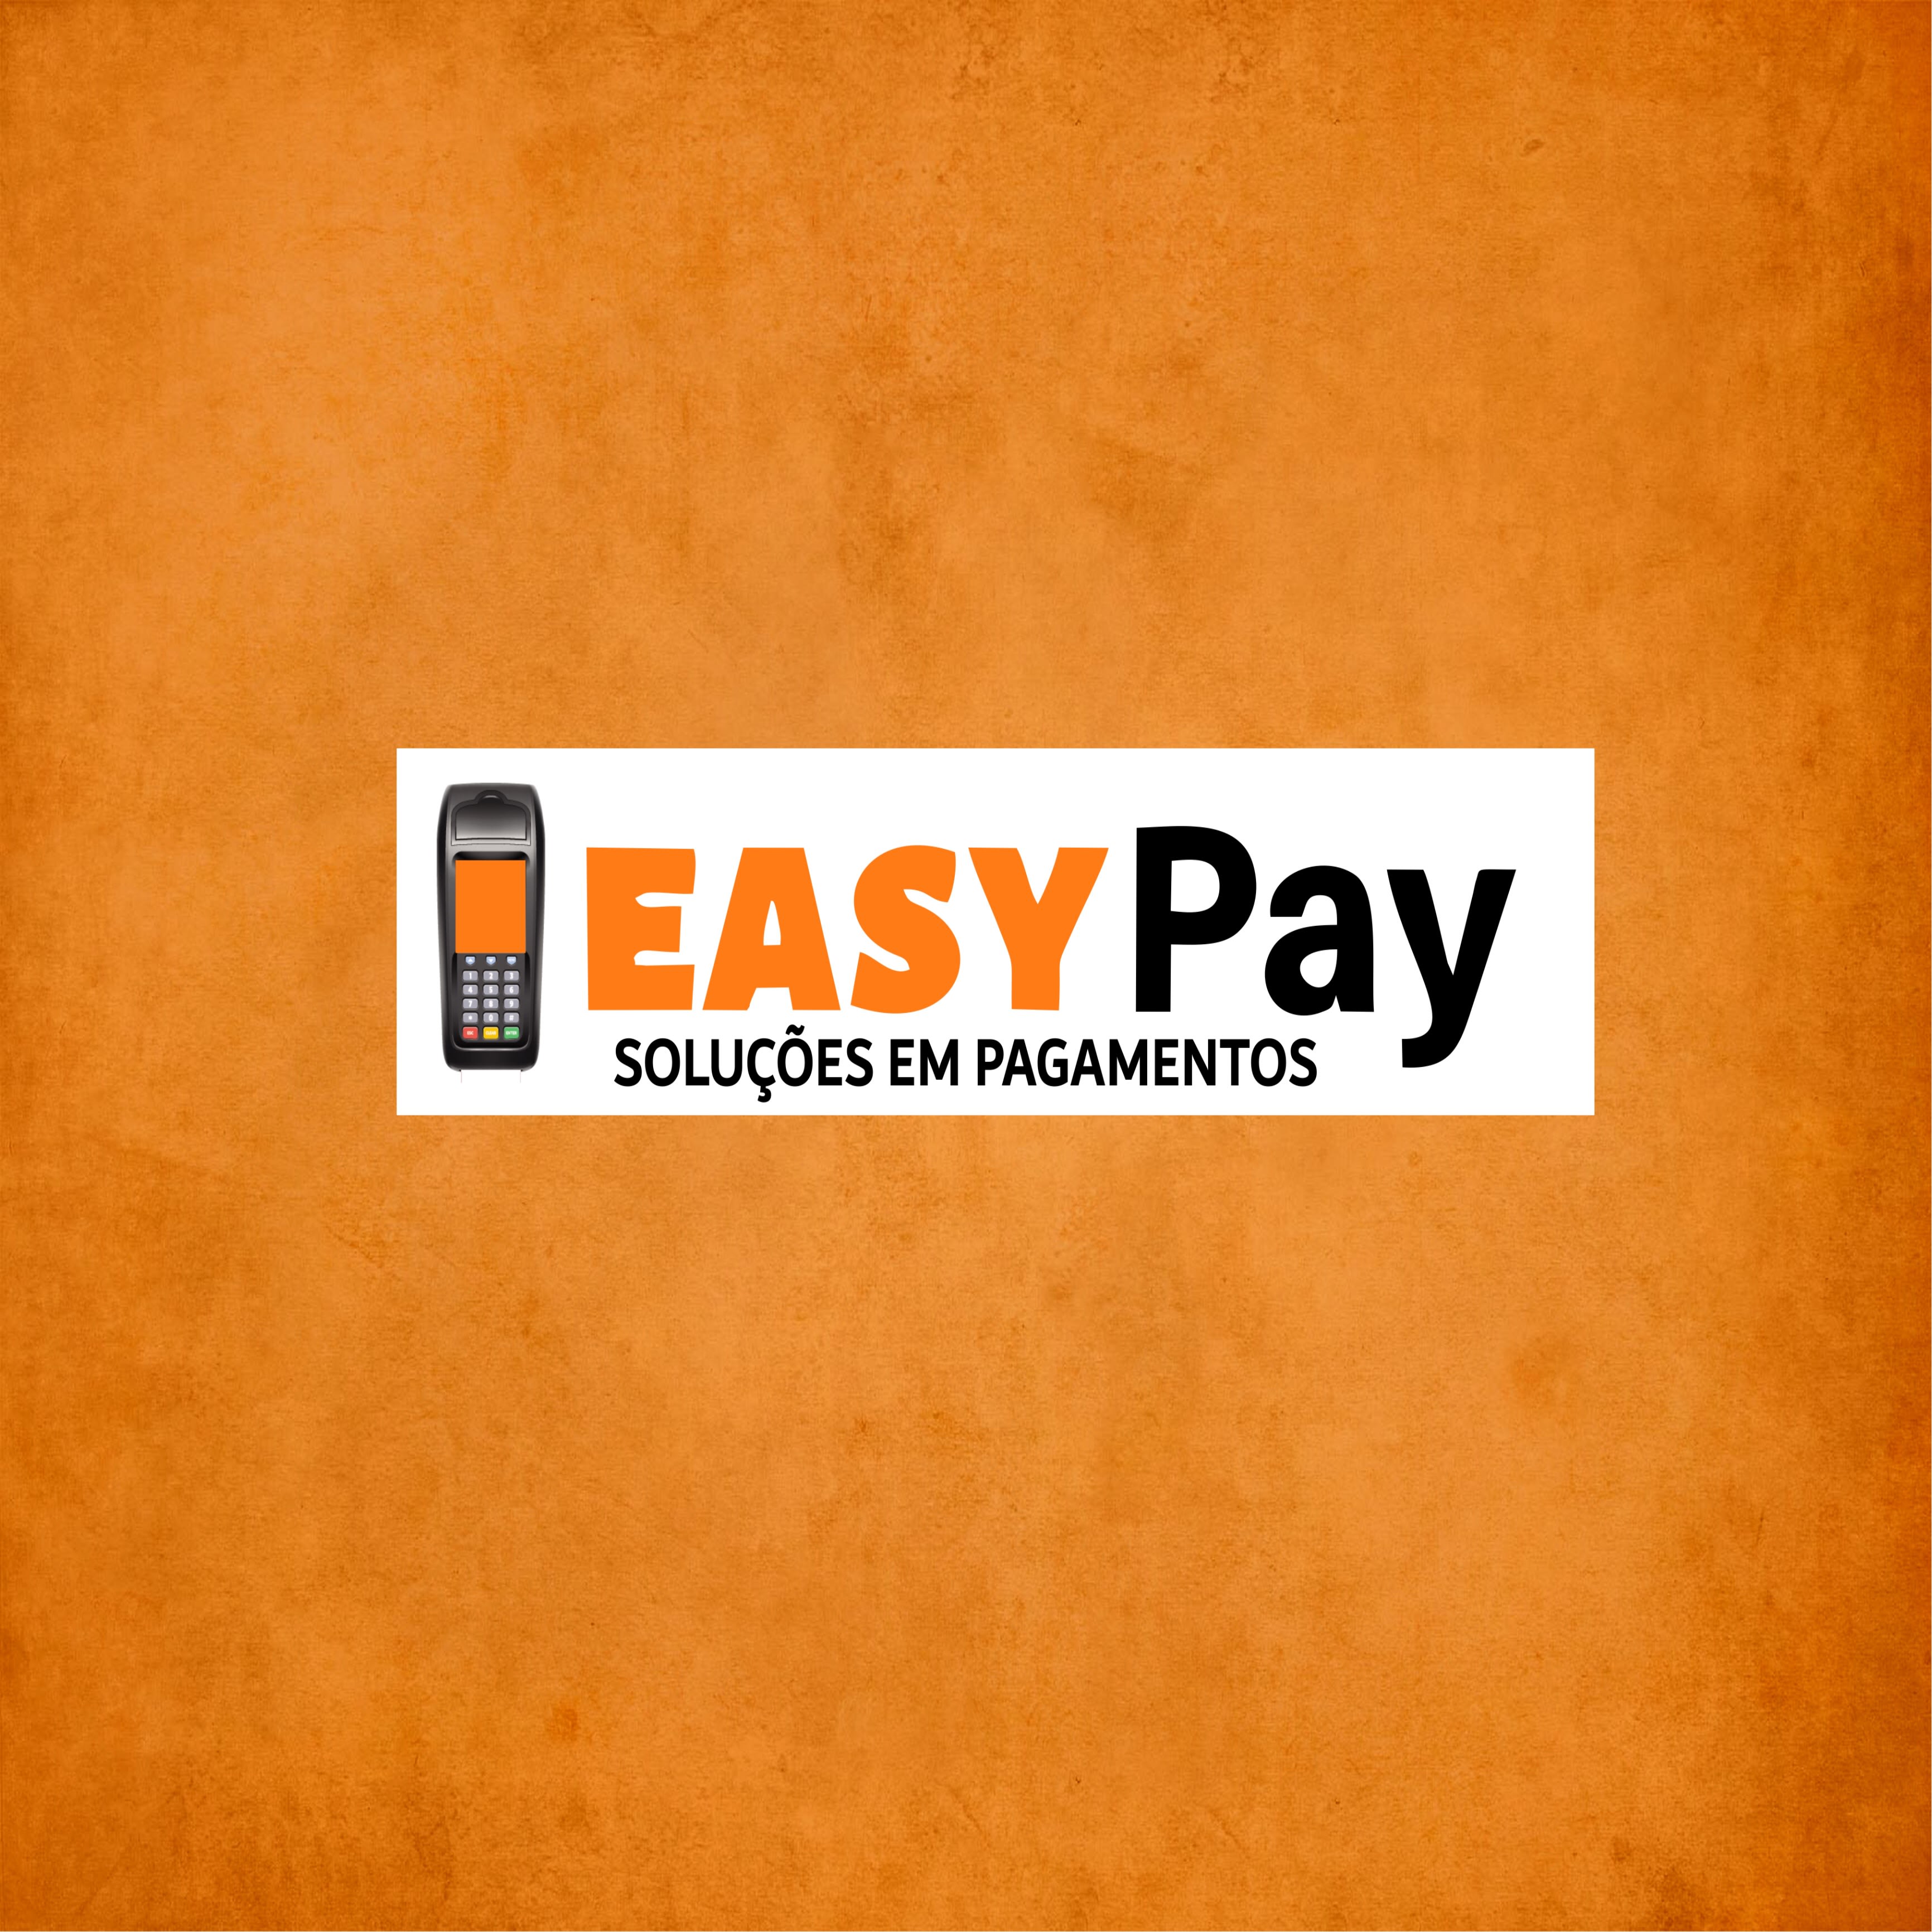 Easy Pay